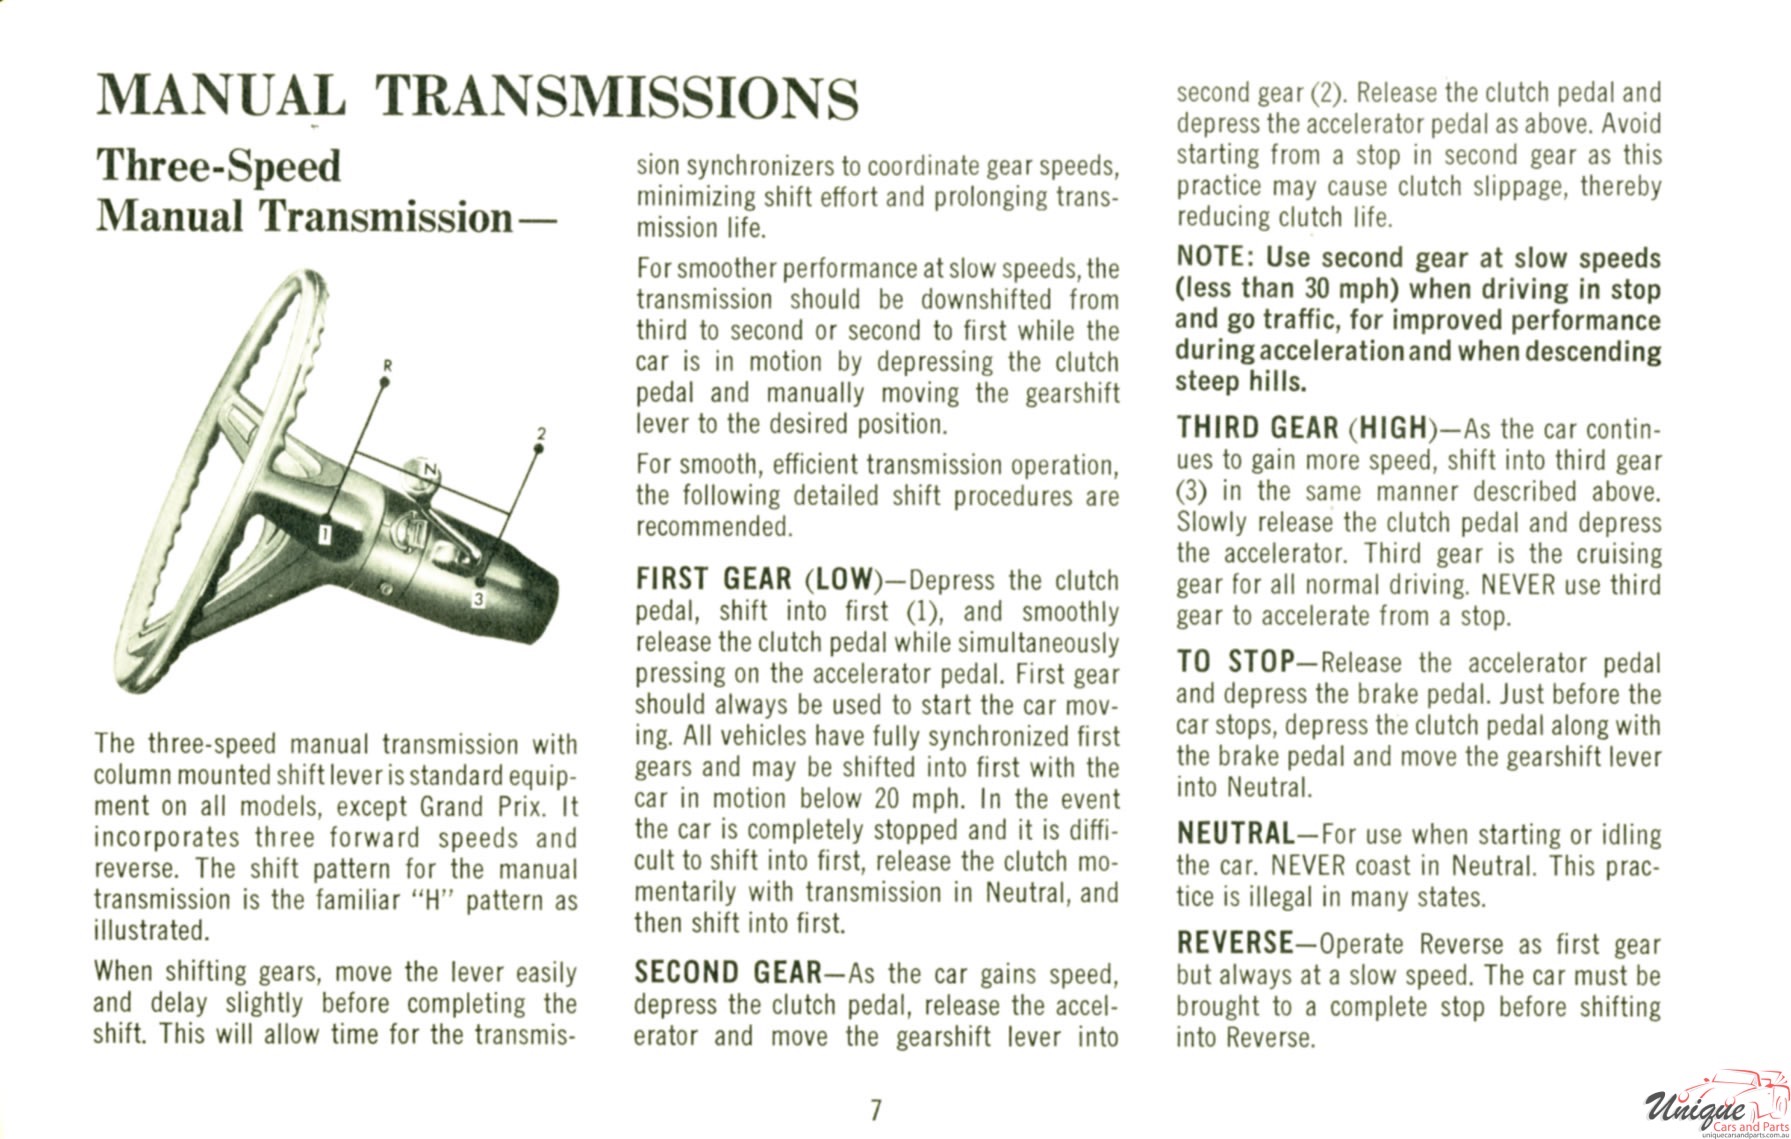 1969 Pontiac Owners Manual Page 12